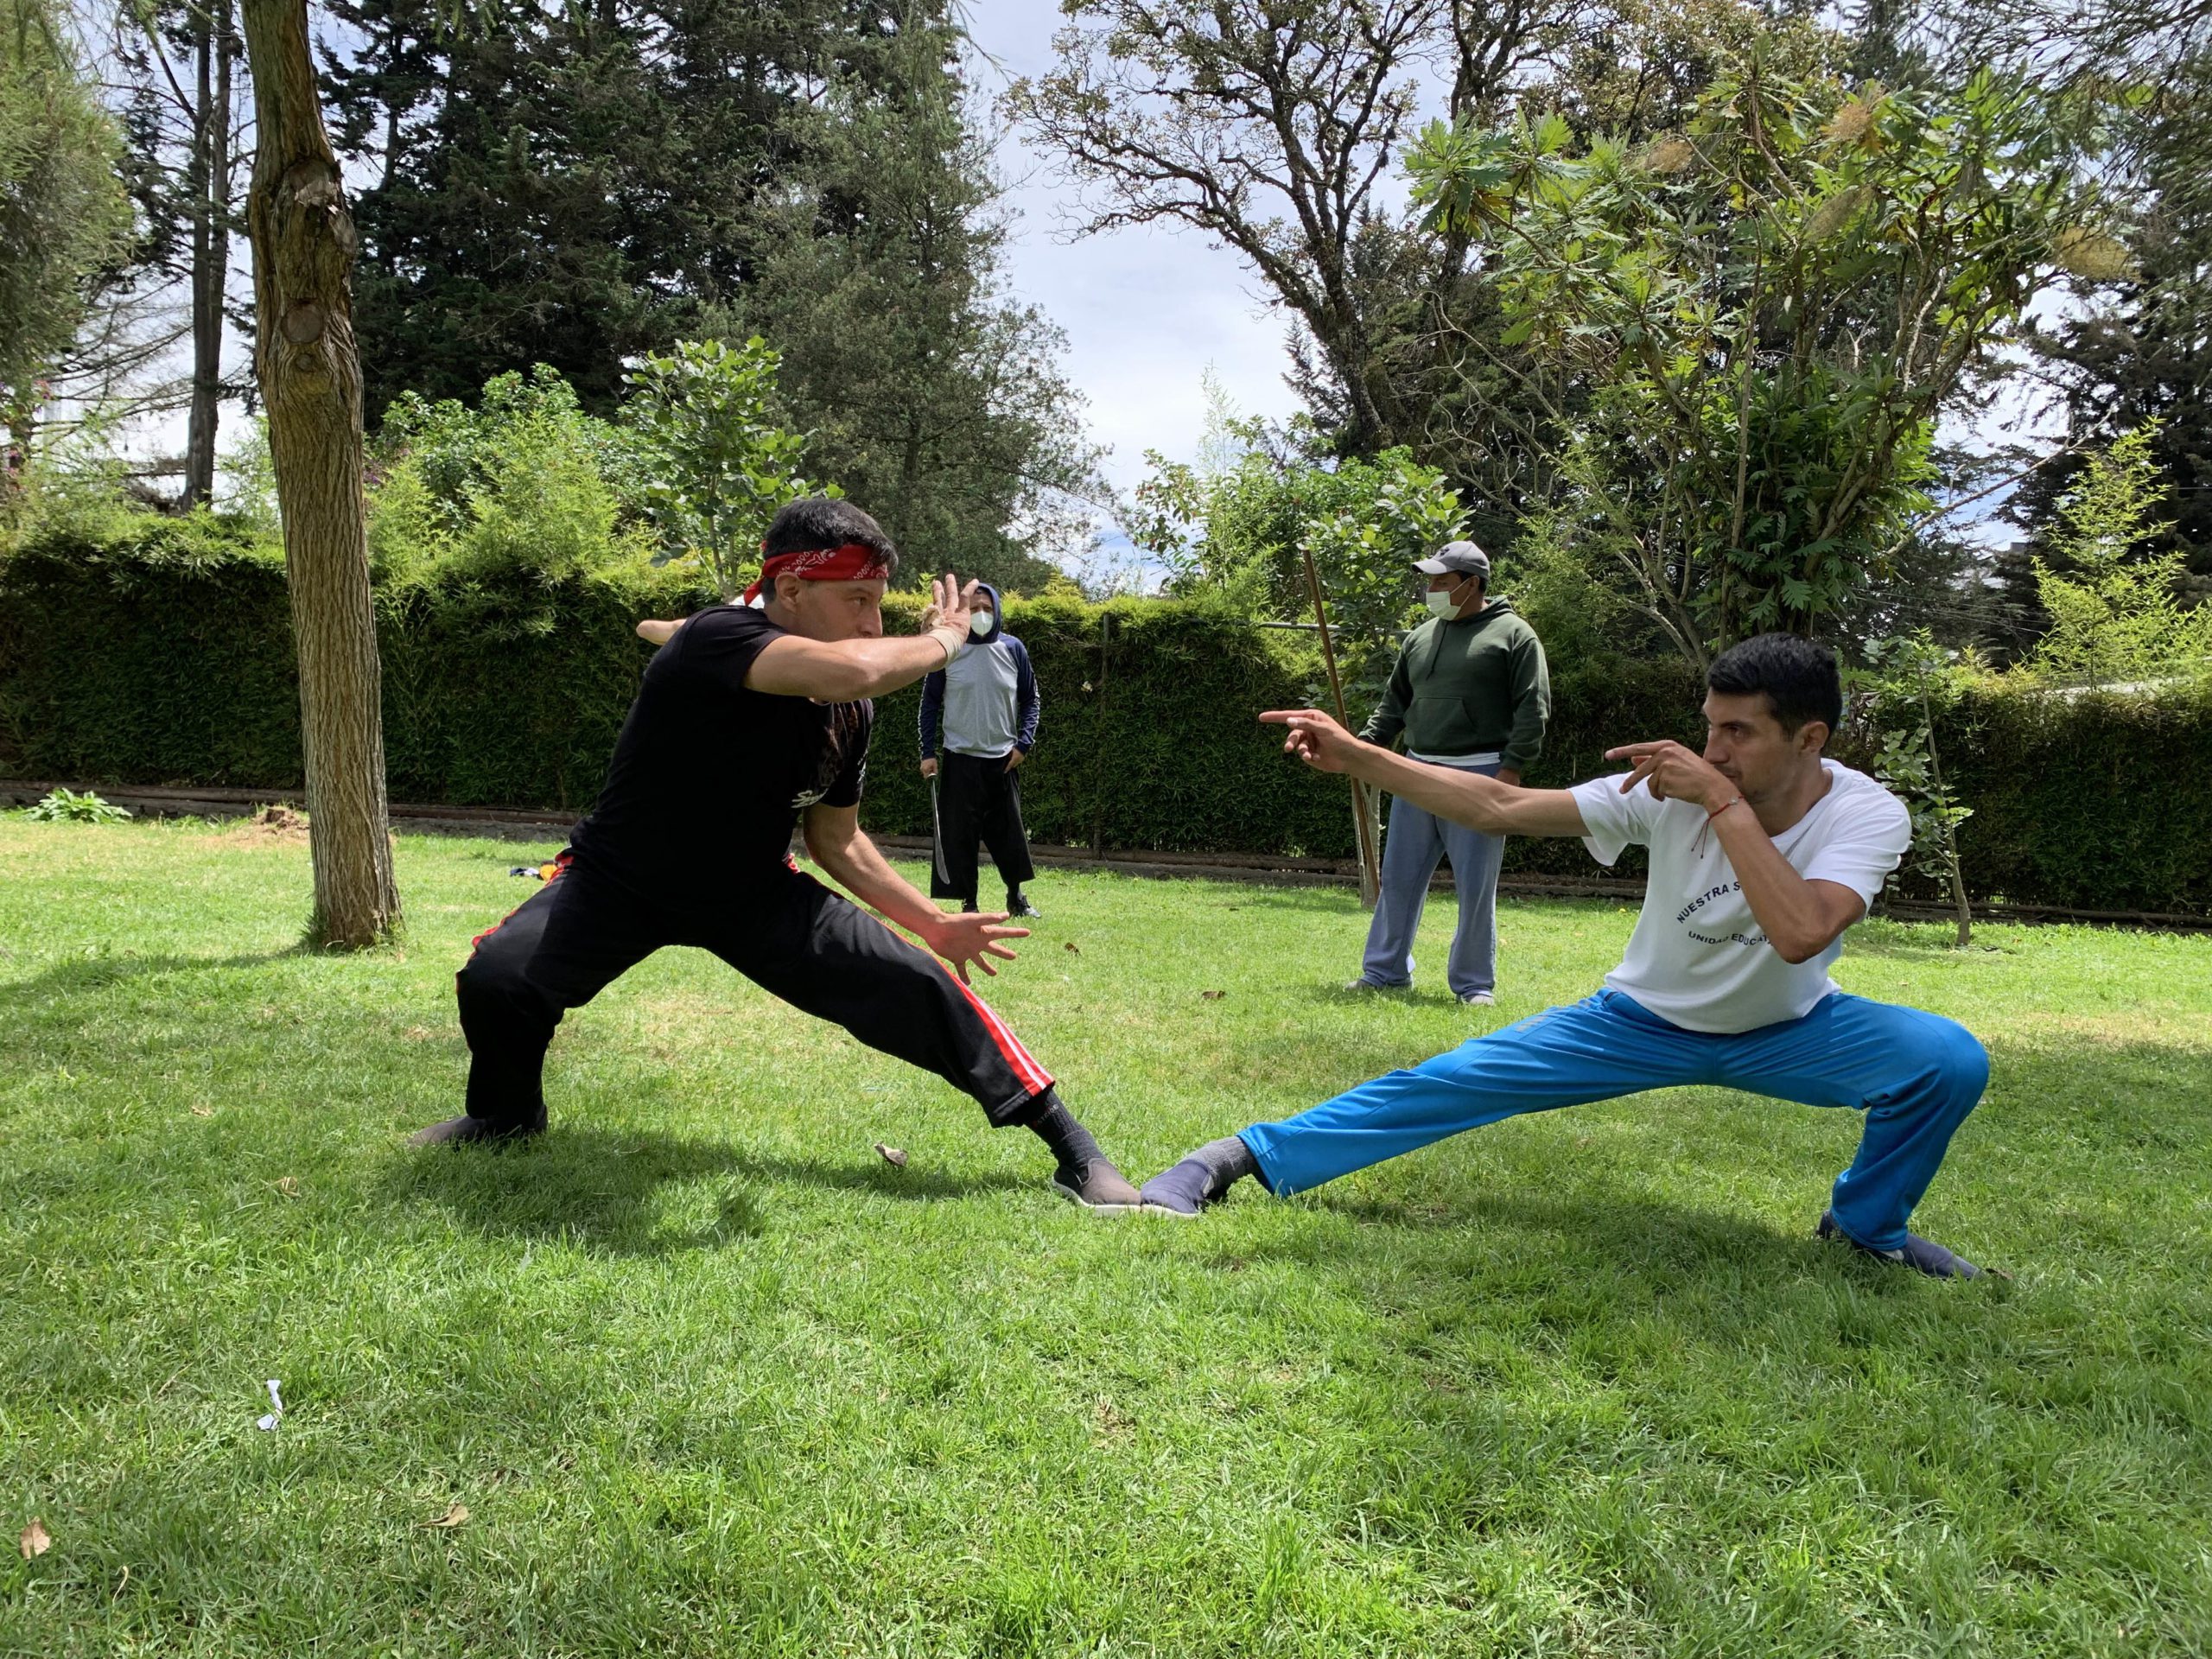 Armando Lara faces off with his son Andrés. He became his kung fu coach and mentor about four years ago, shortly after receiving his stomach dysplasia diagnosis